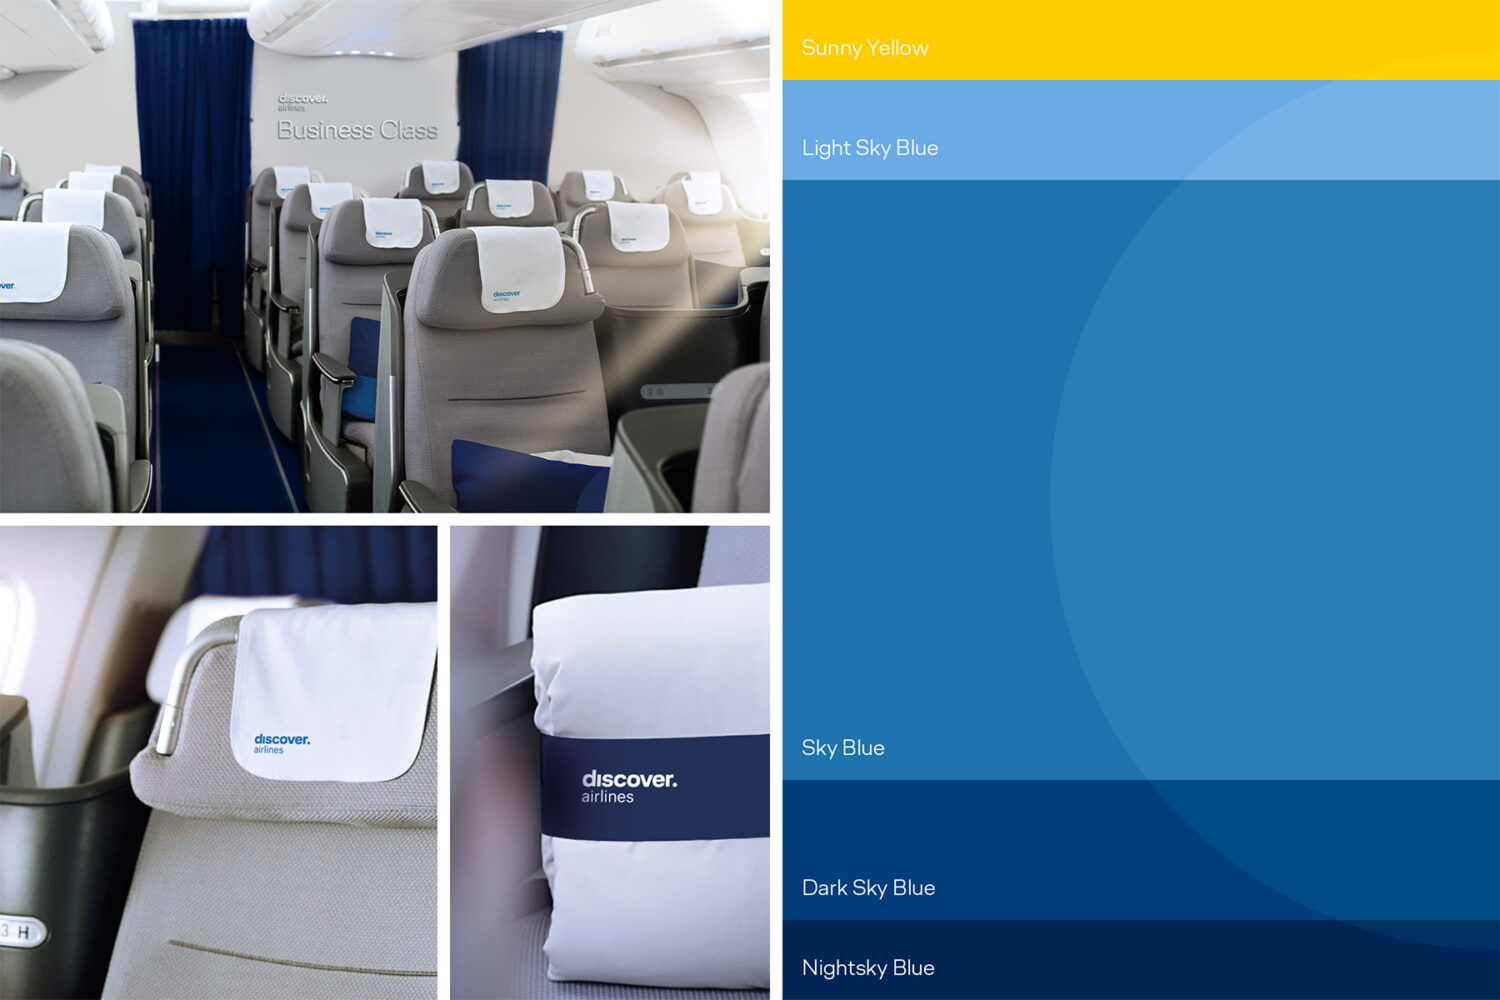 Discover Airlines Corporate Design – Farben, Quelle: Discover Airlines